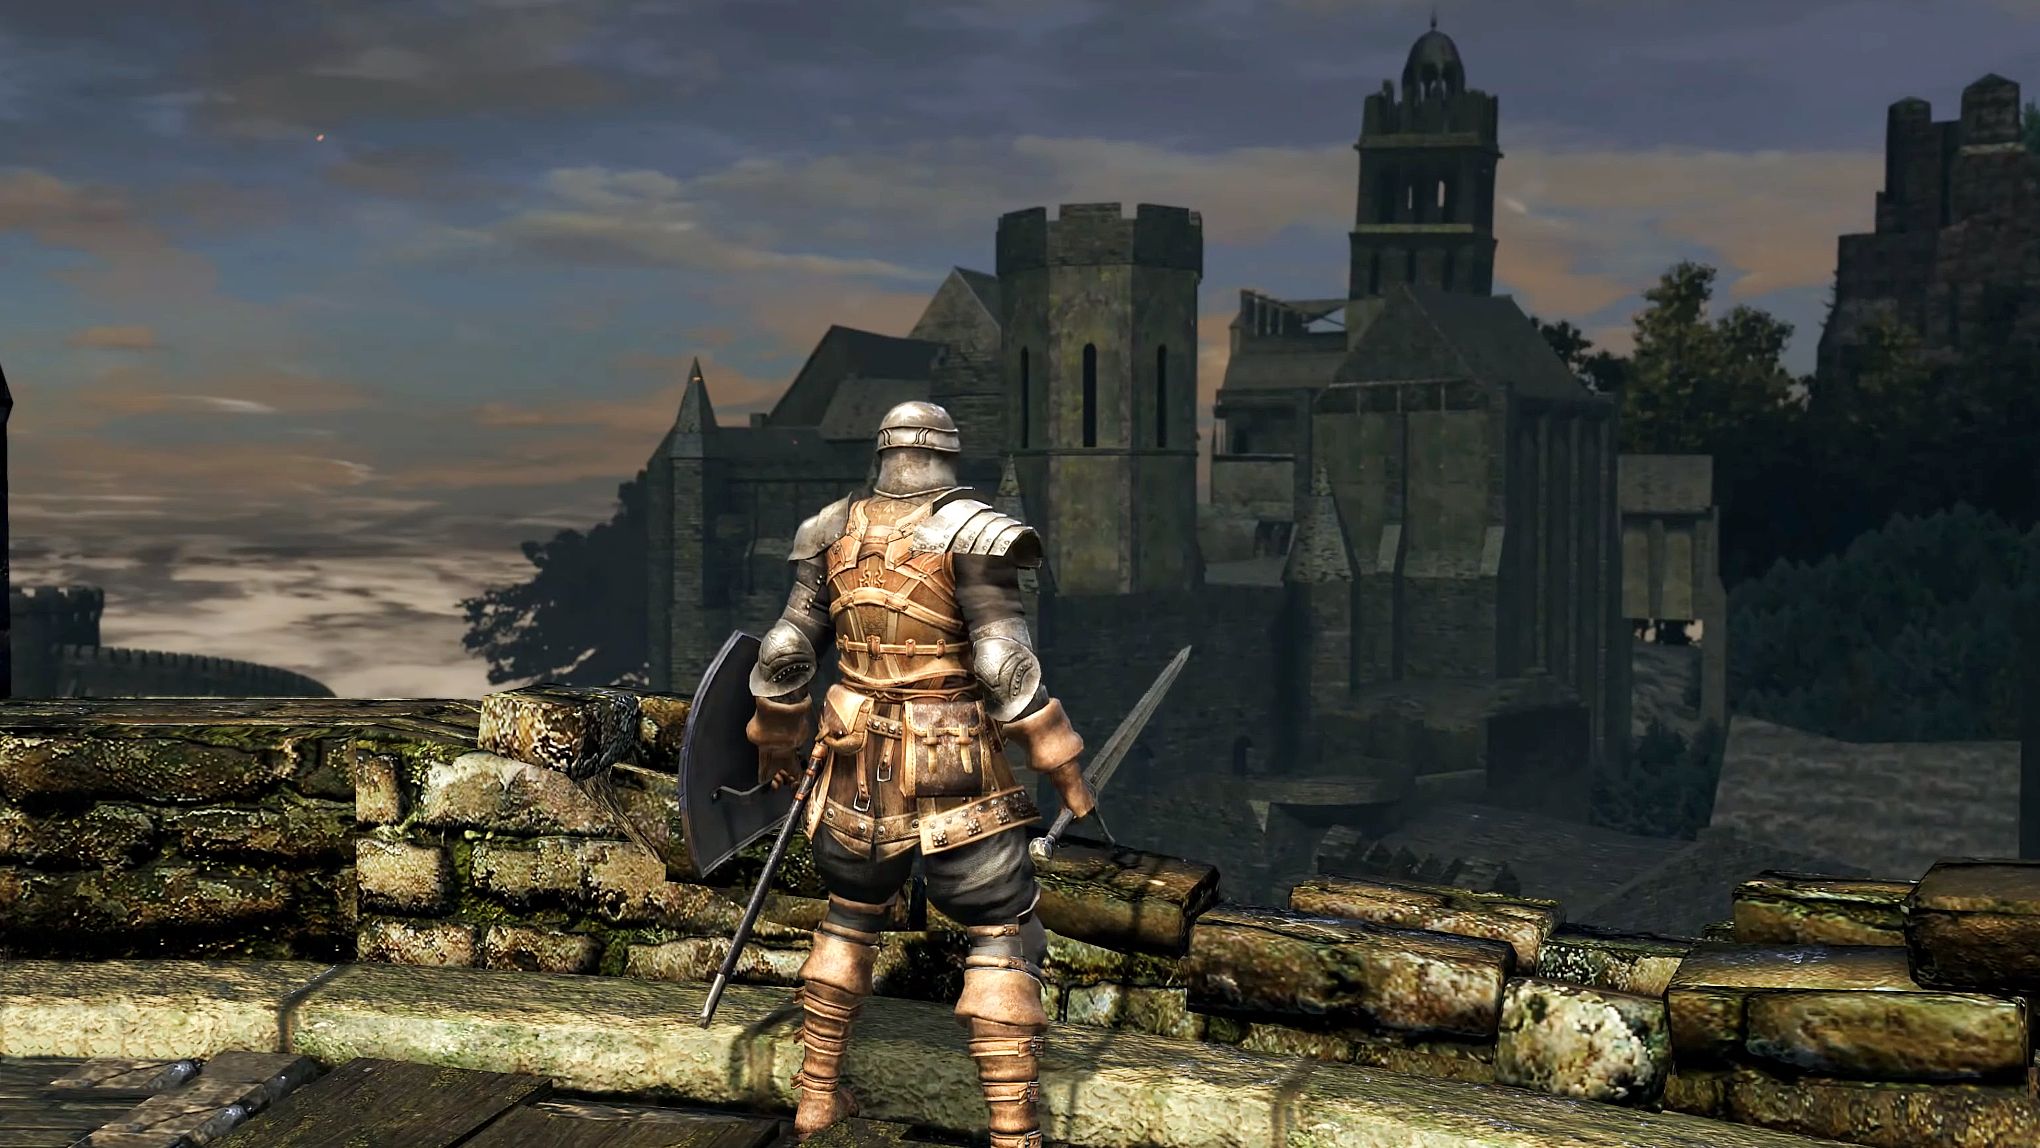 Dark Souls diary: Undead Burg's level design is still unmatched